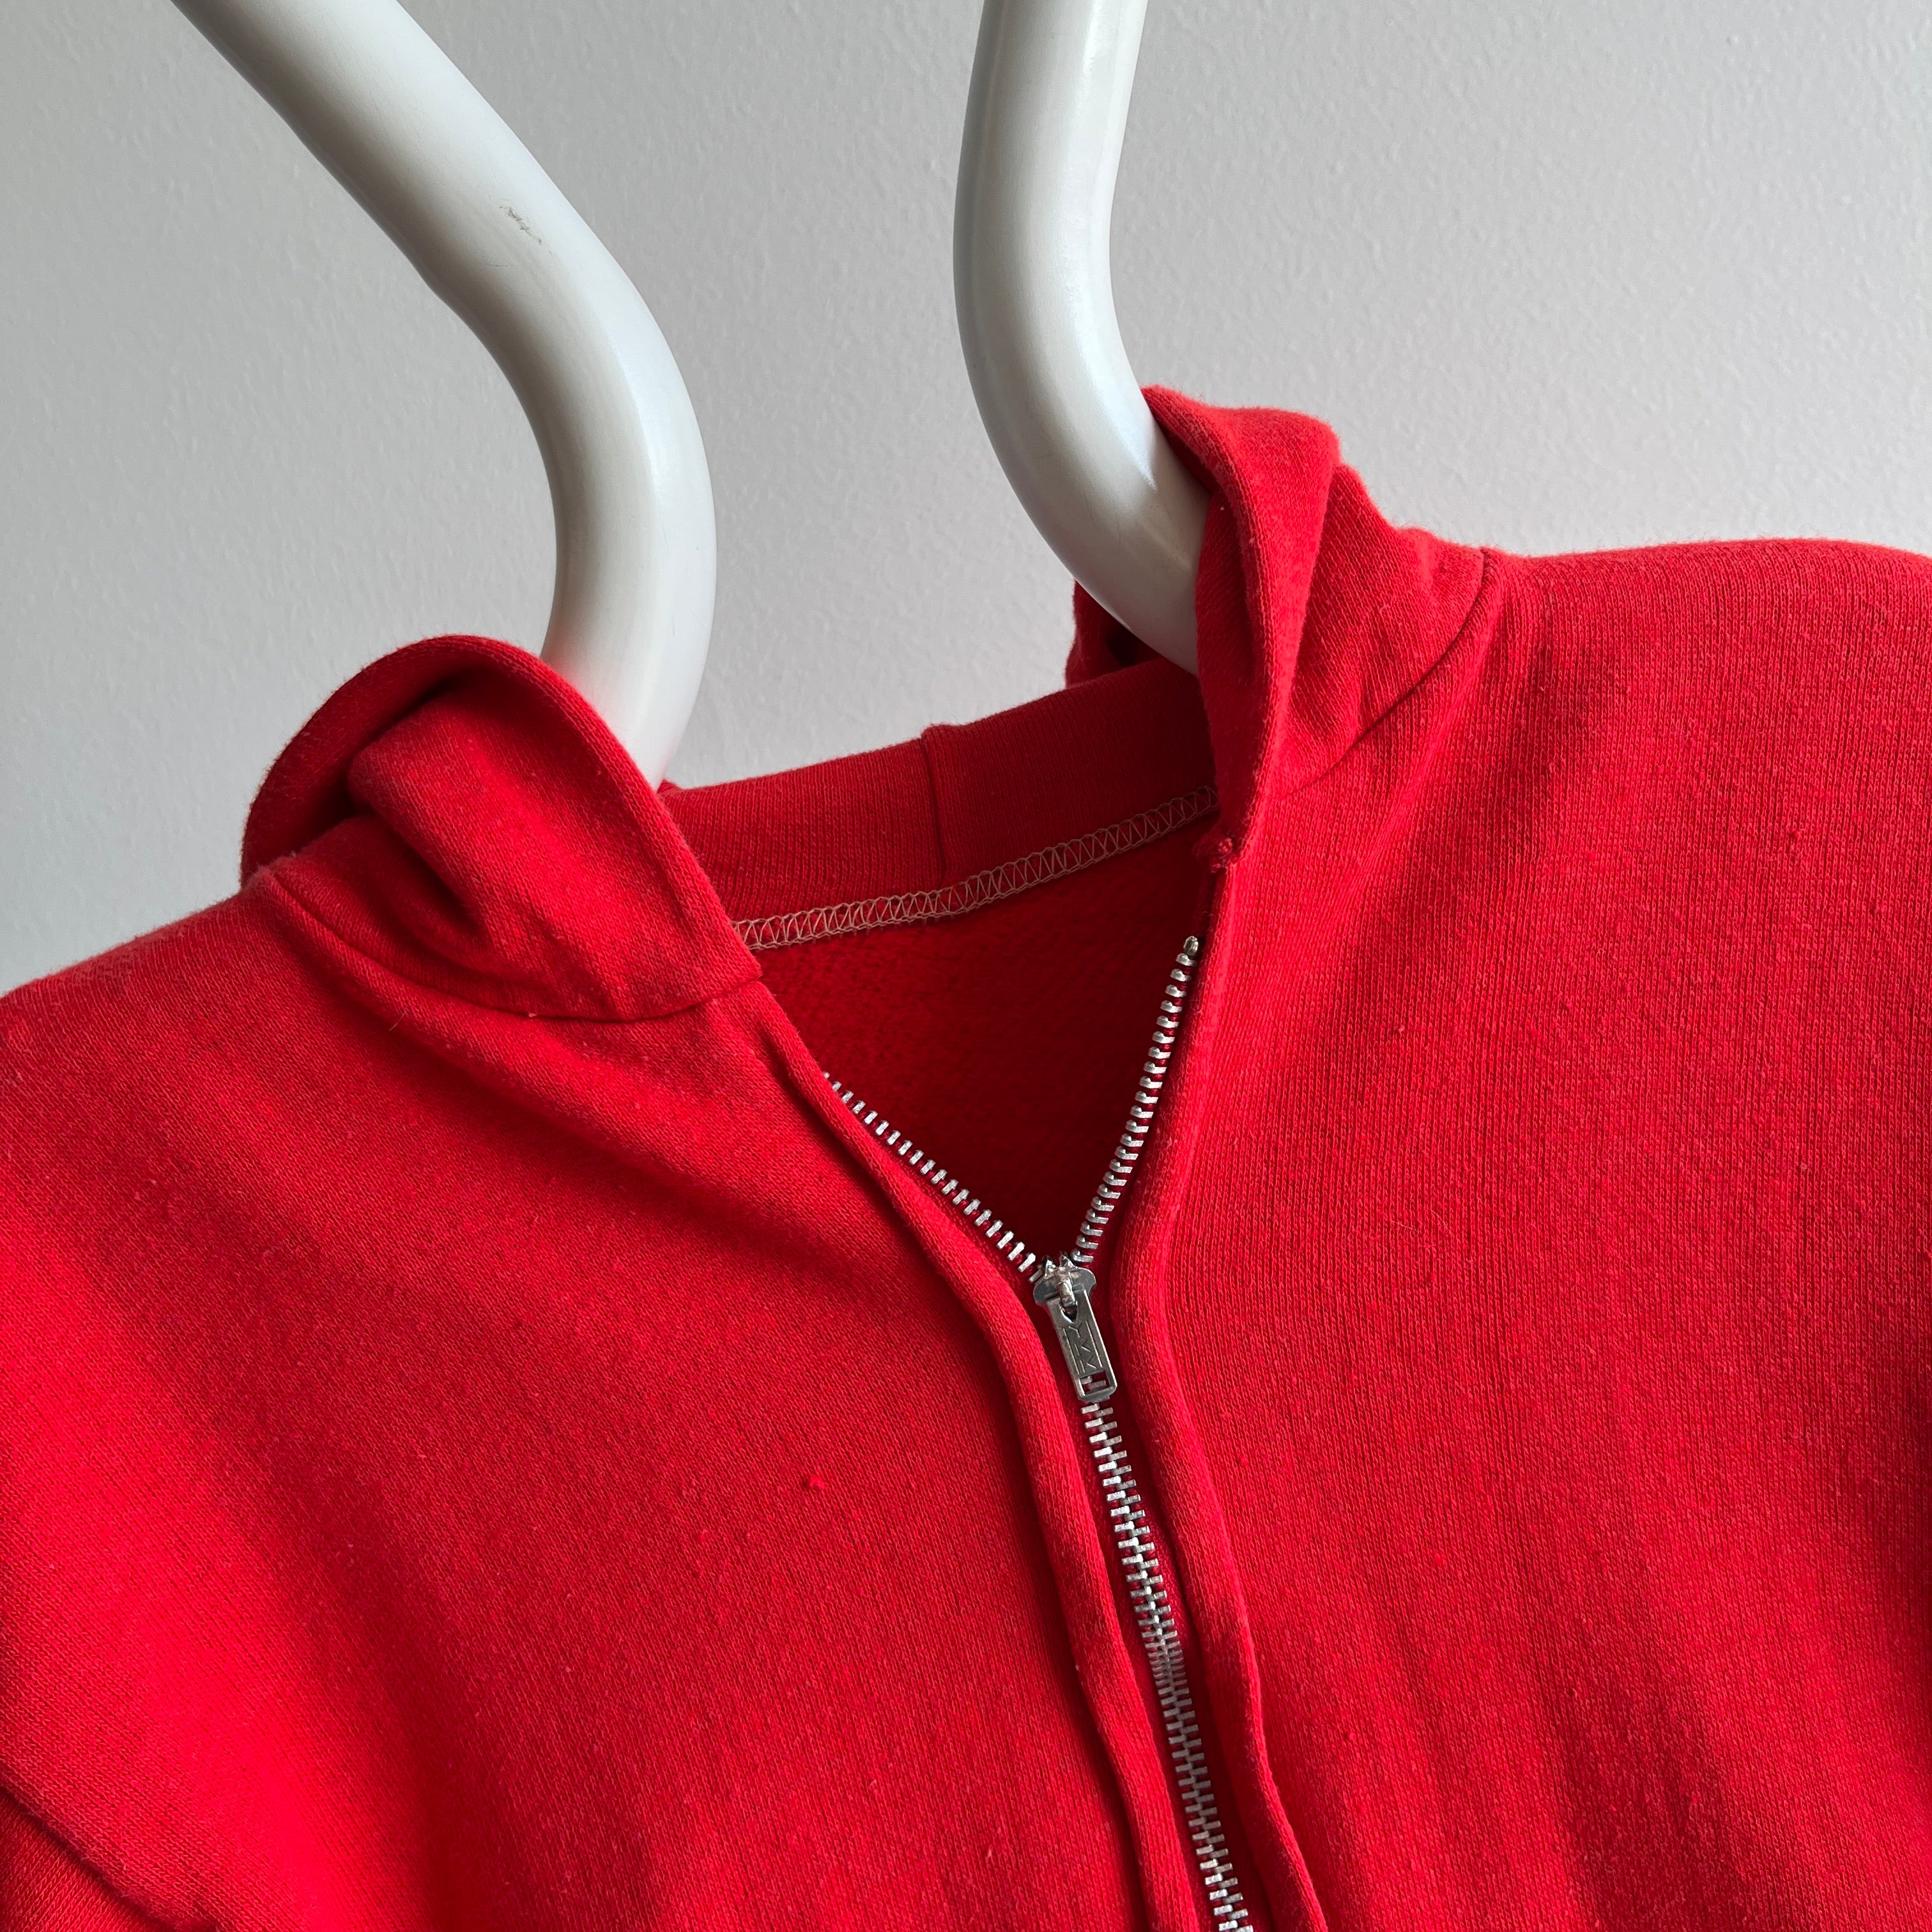 1980s Epic Faded/Vibrant Red Hoodie with Contrast Stitching